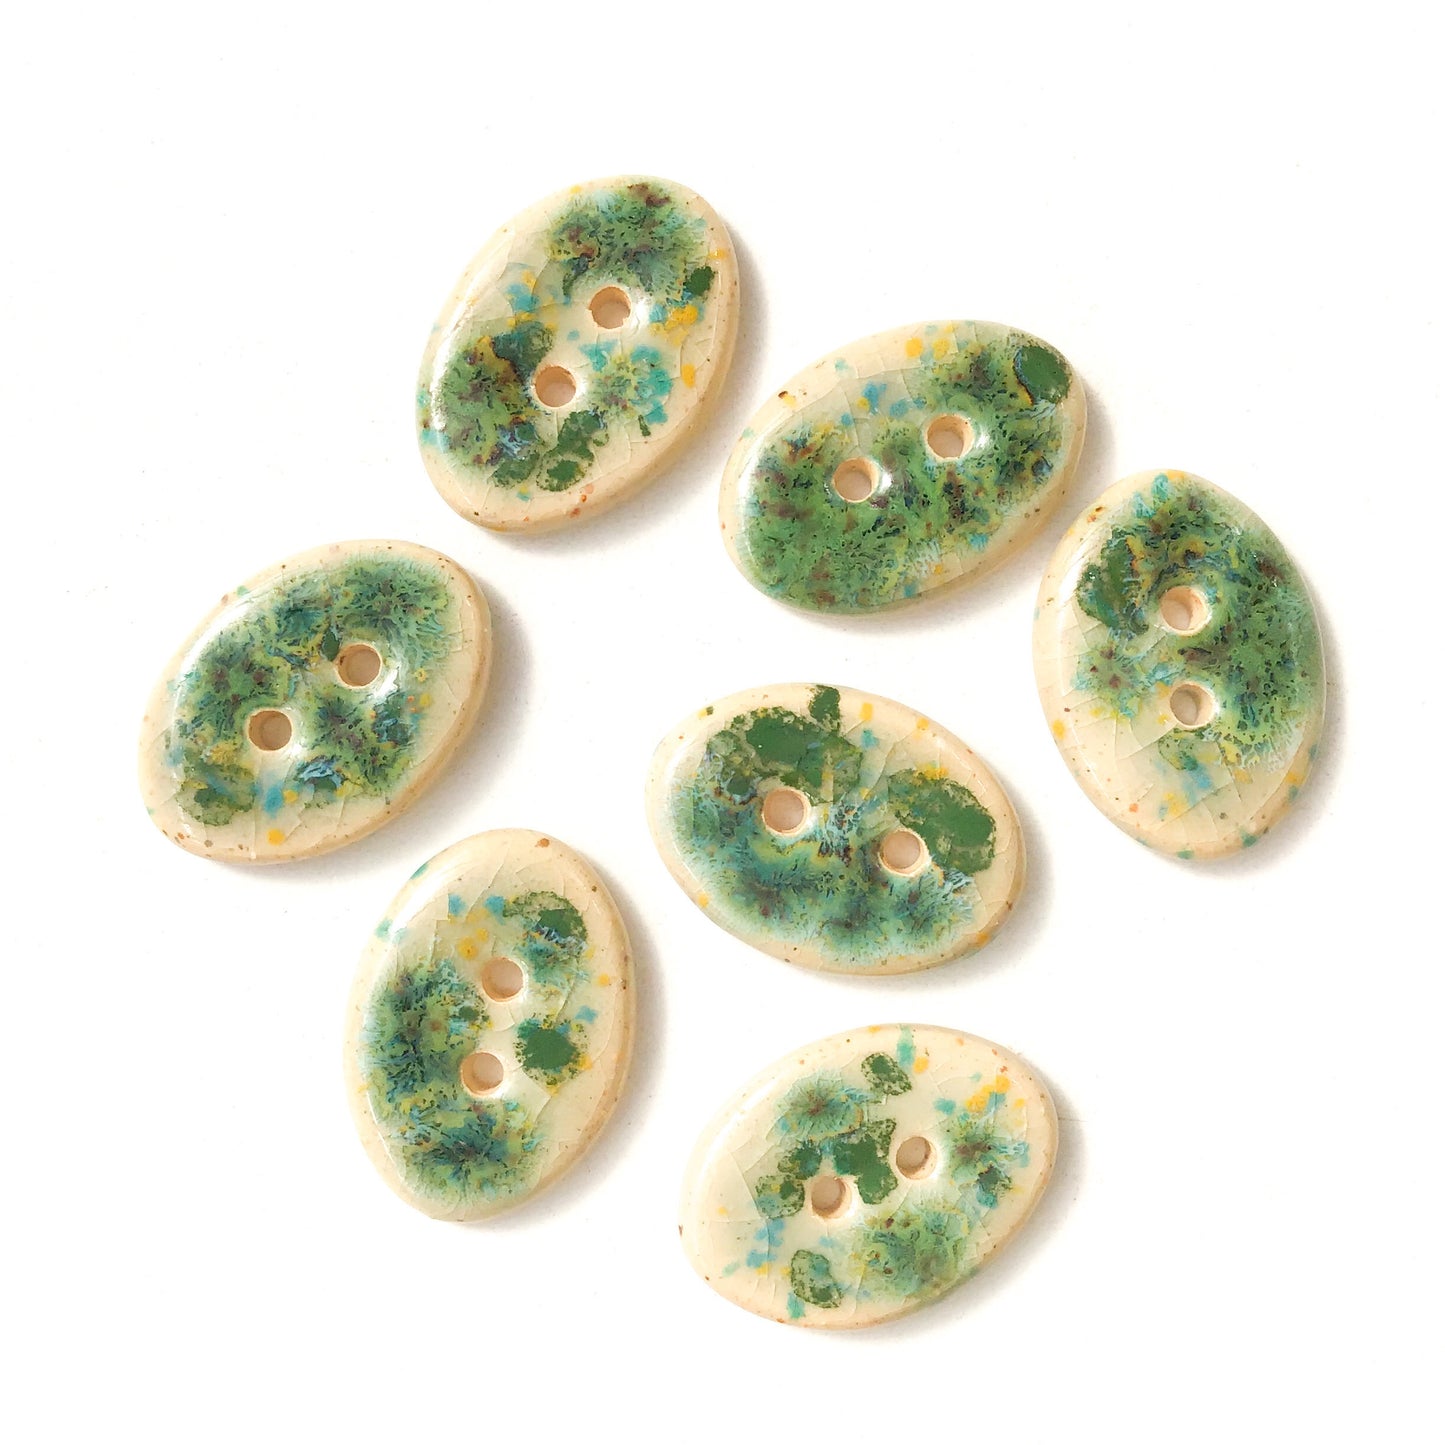 Algae Green Speckled Ceramic Buttons - Oval Clay Buttons - 5/8" x 7/8" (ws-3)